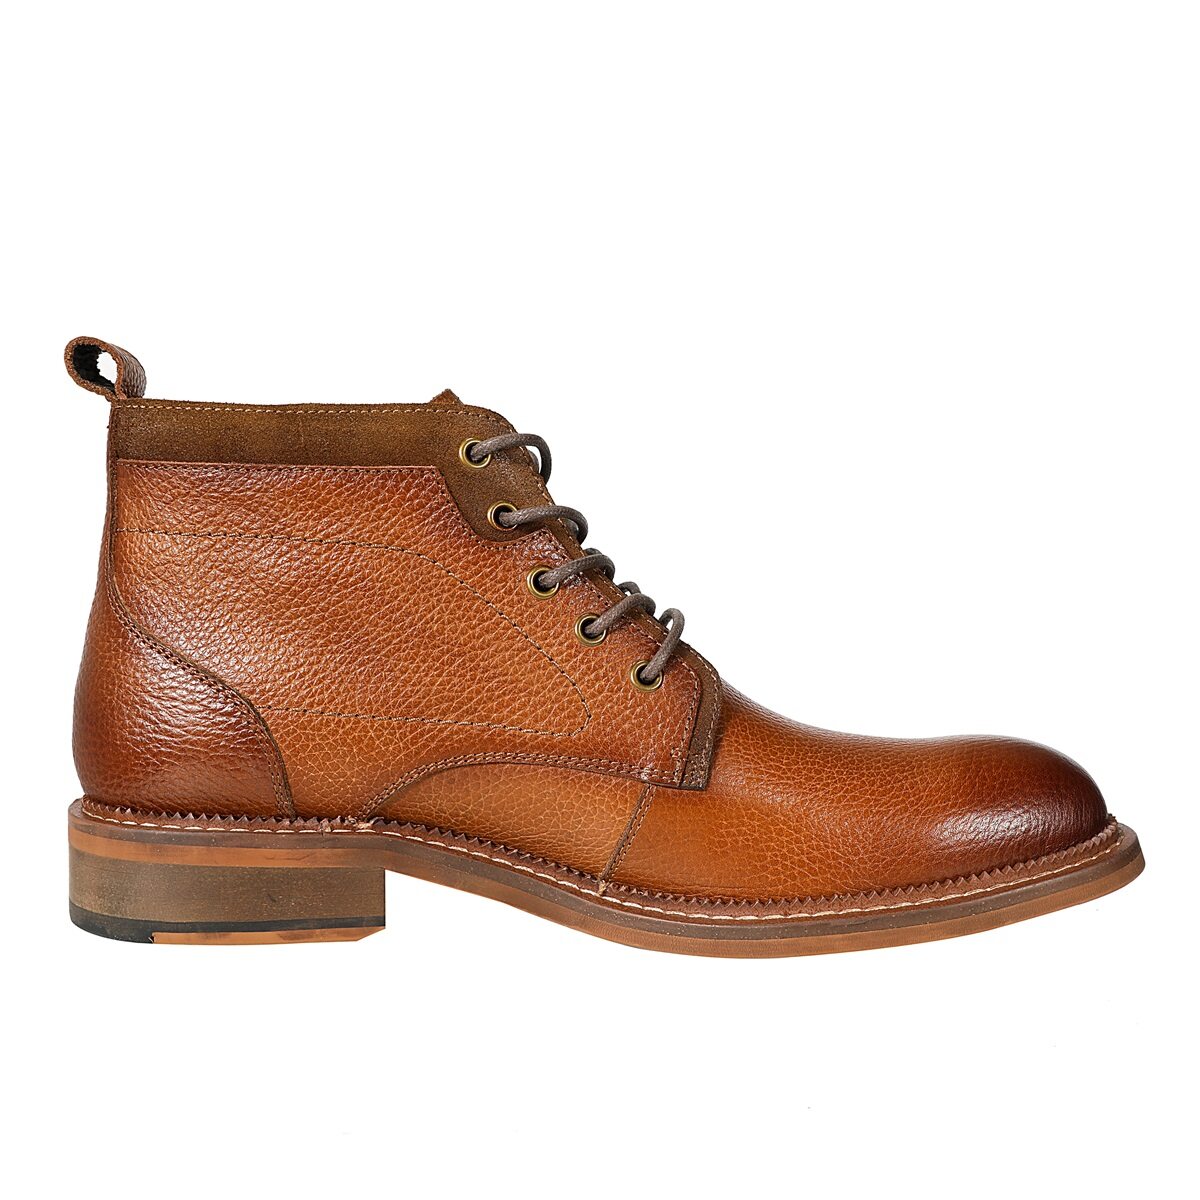 Men's Round-Toe High-Top Polo Boots in Brown